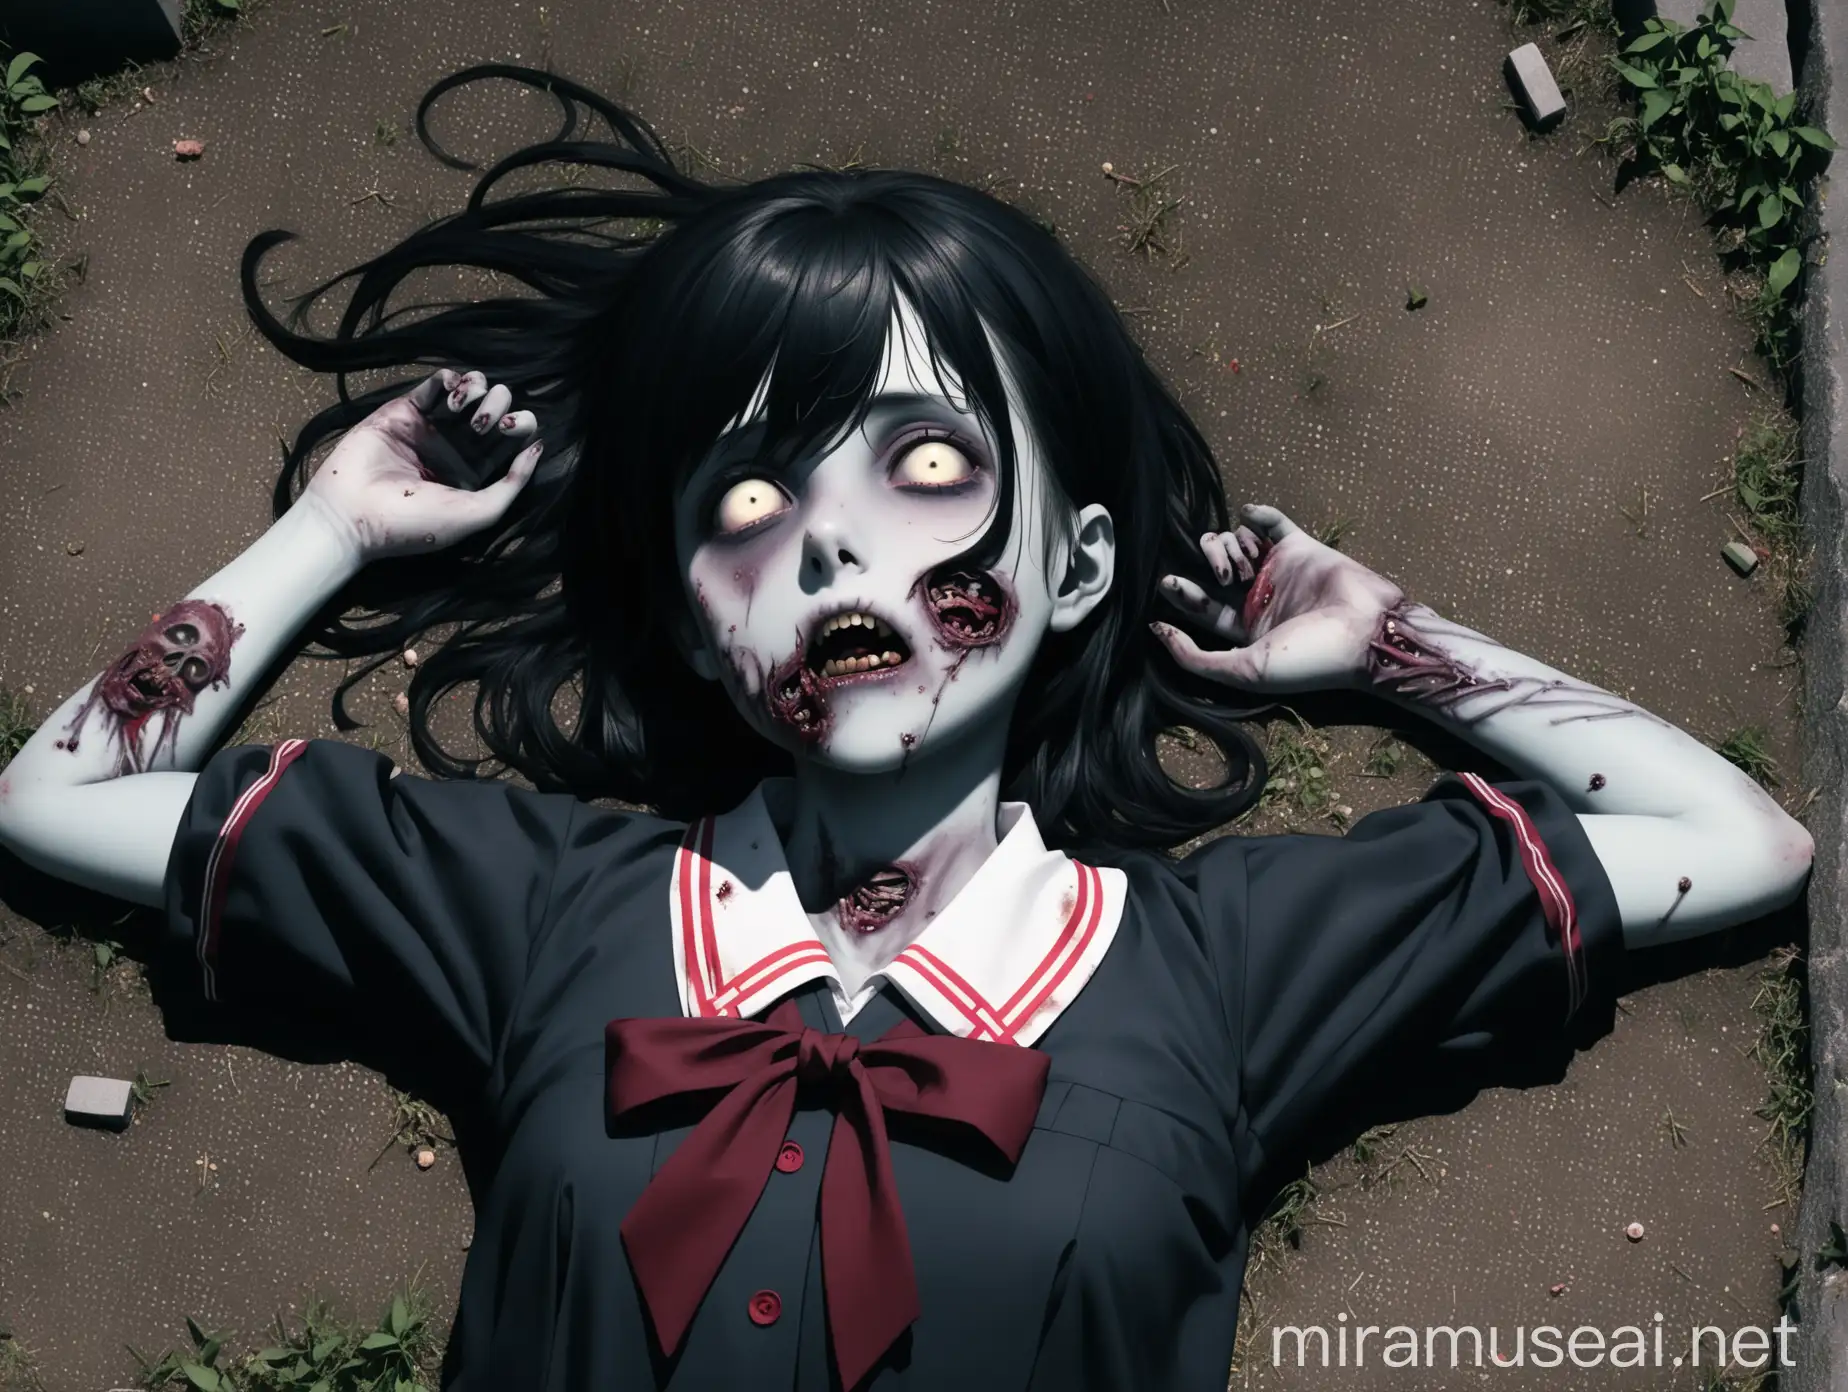 Zombie Girl Lying on Graveyard Spooky Japanese Schoolgirl with Stitched Skin